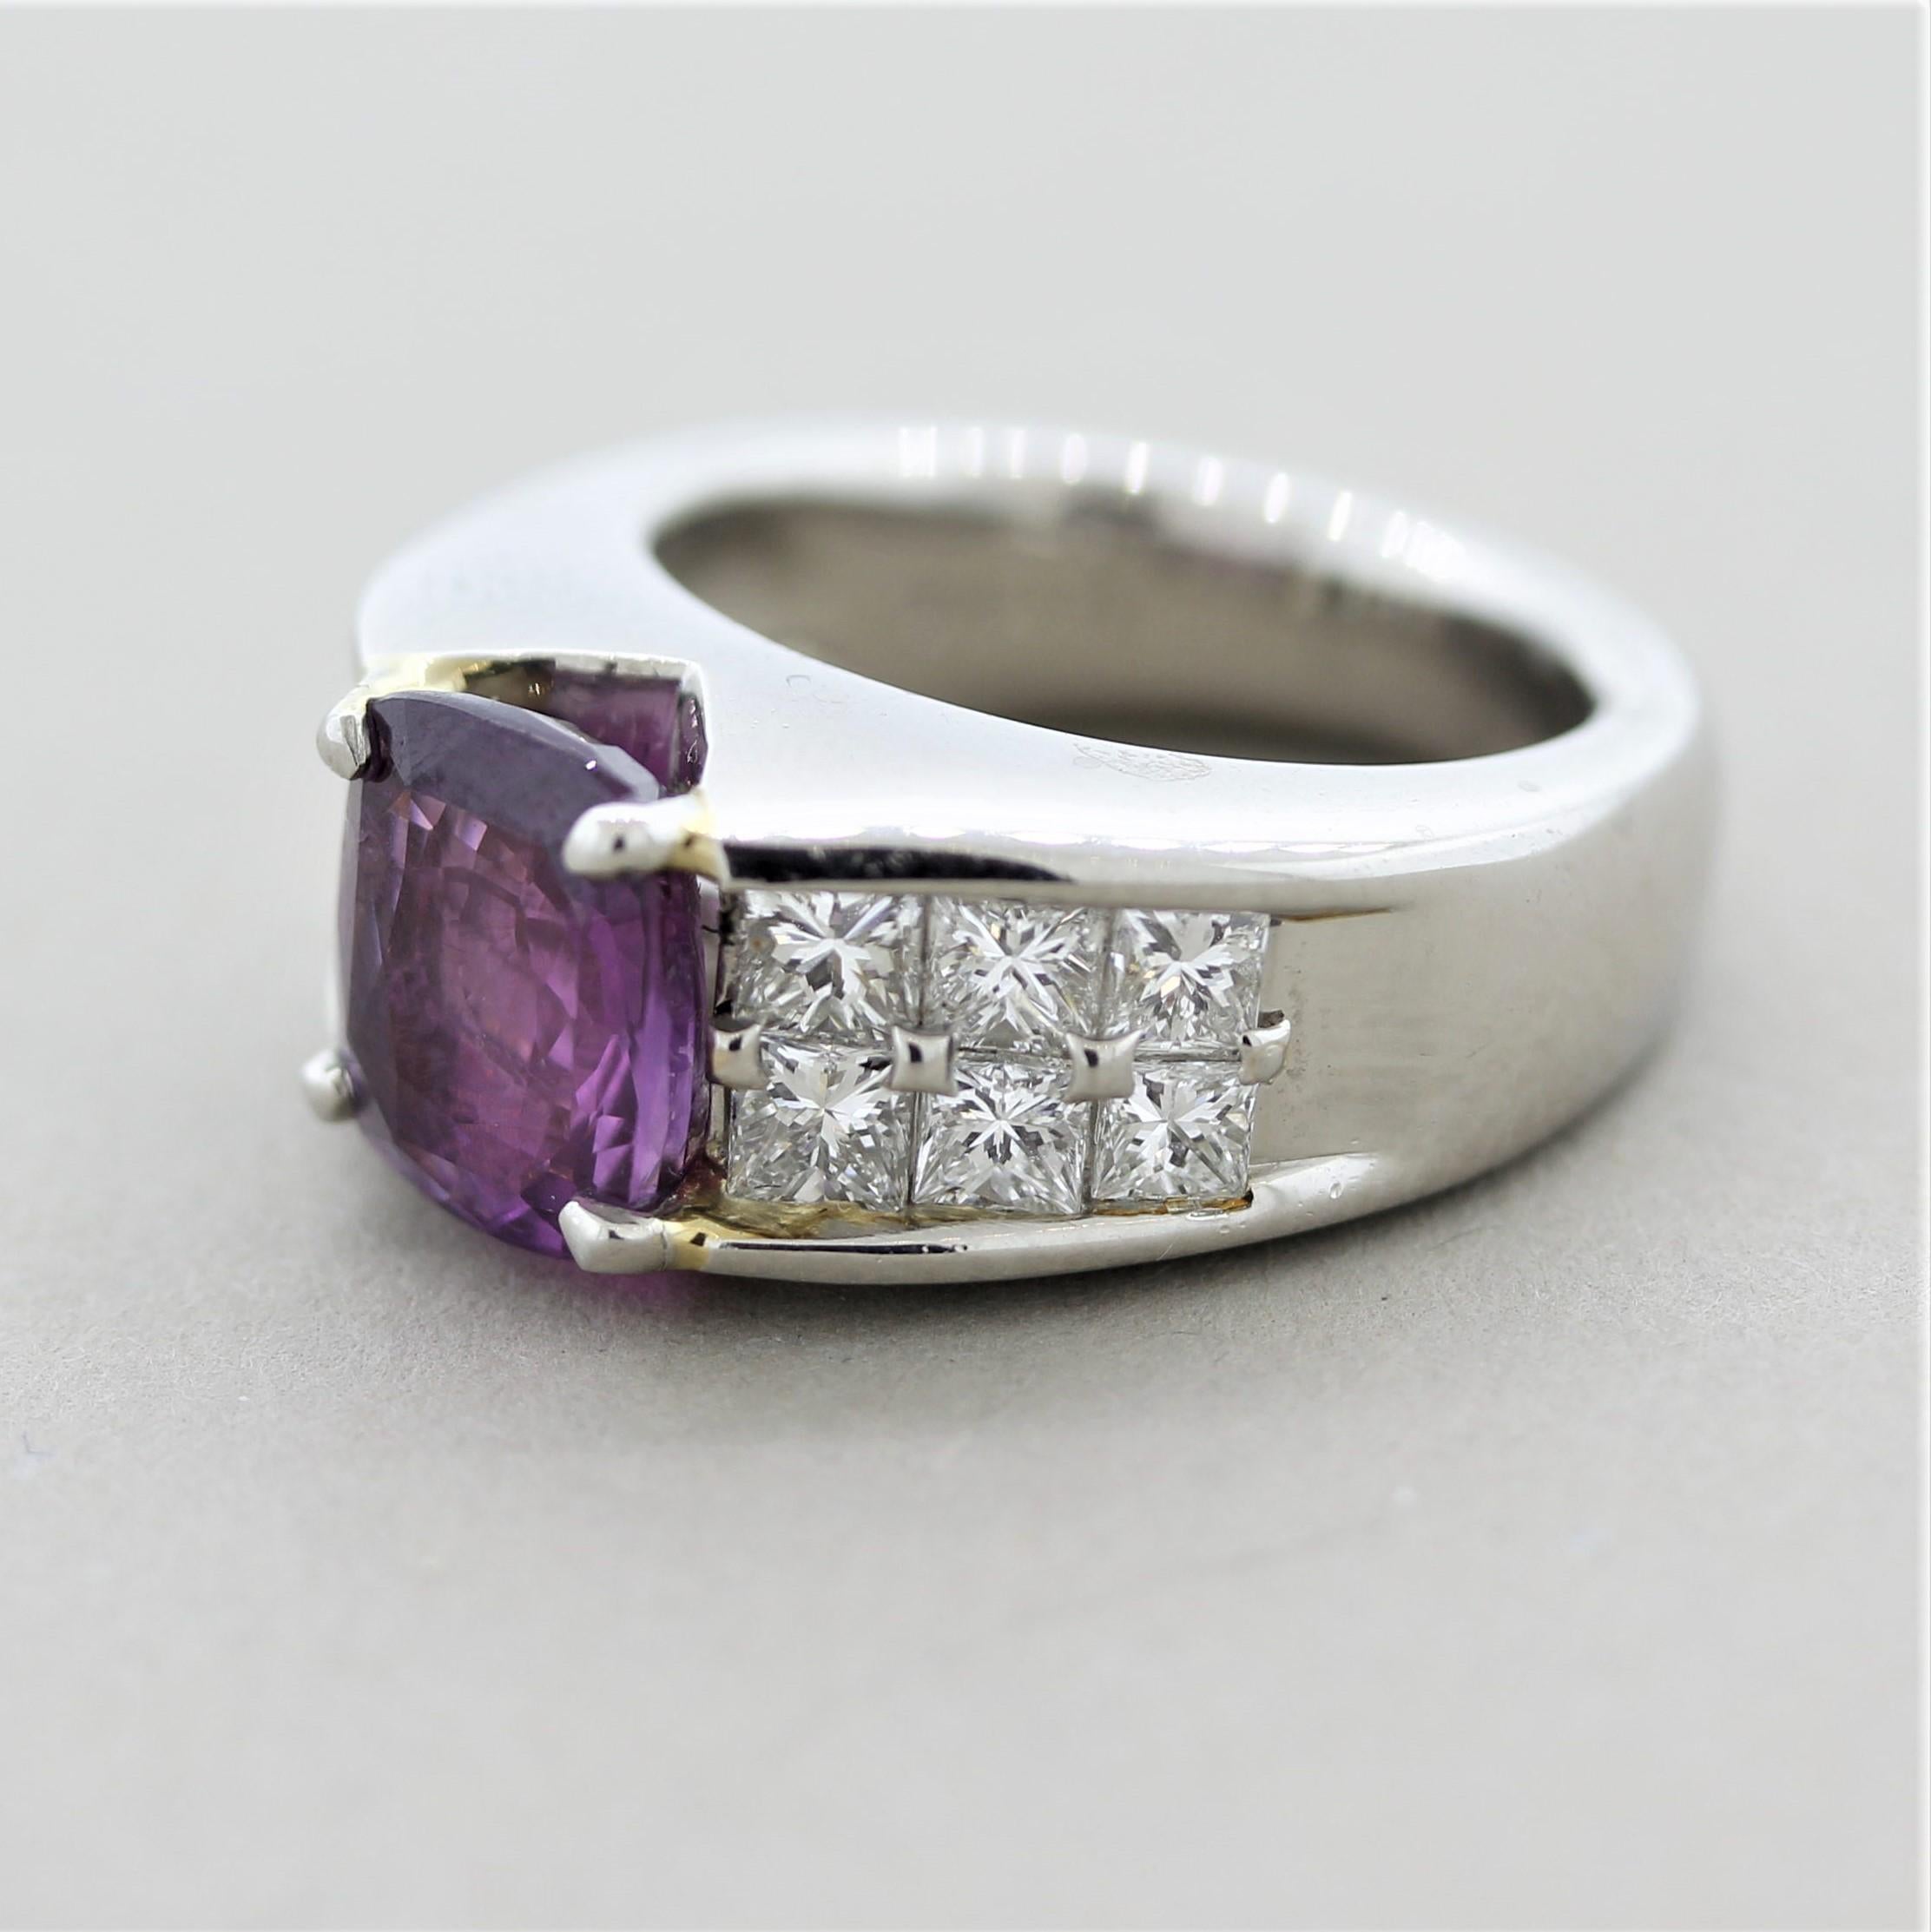 Wow! A stunning heavy platinum ring featuring a gem purple sapphire weighing 3.09 carats. It is cushion shaped and has a bright and vivid purple color. It is accented by 1.47 carats of large princess-cut diamonds set on the shoulders of the ring.